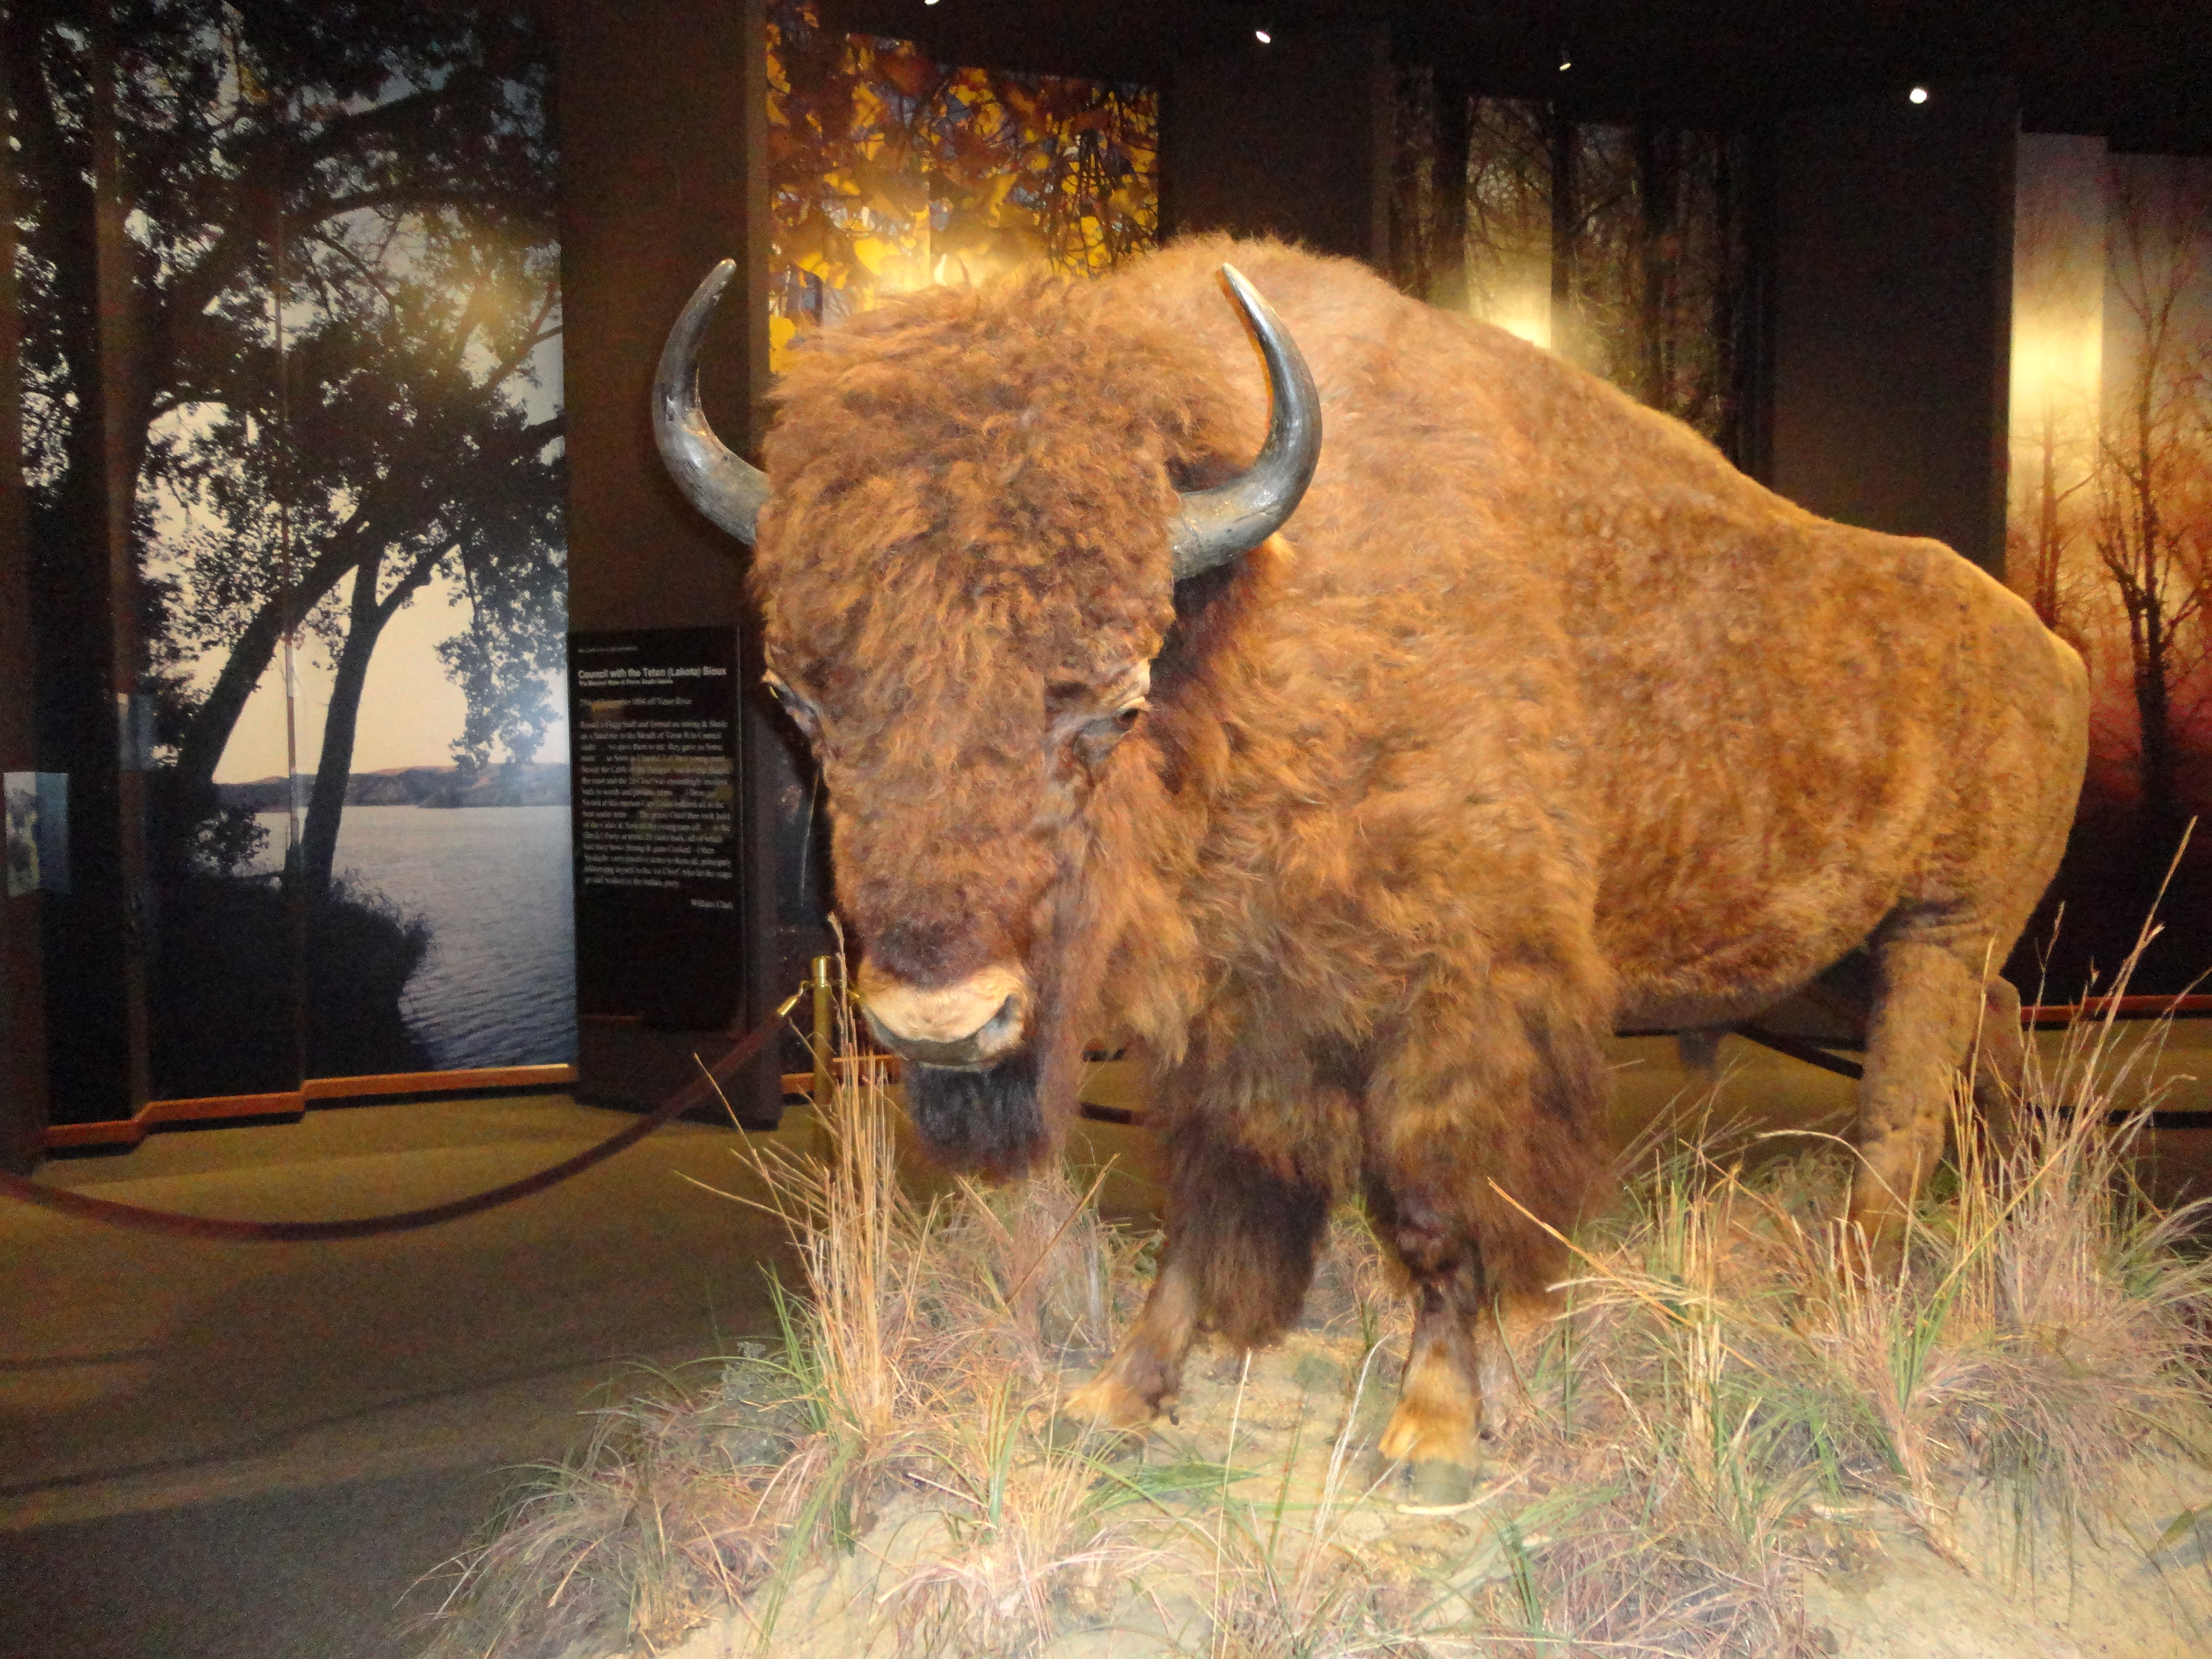 The Museum of Westward Expansion gets harry!